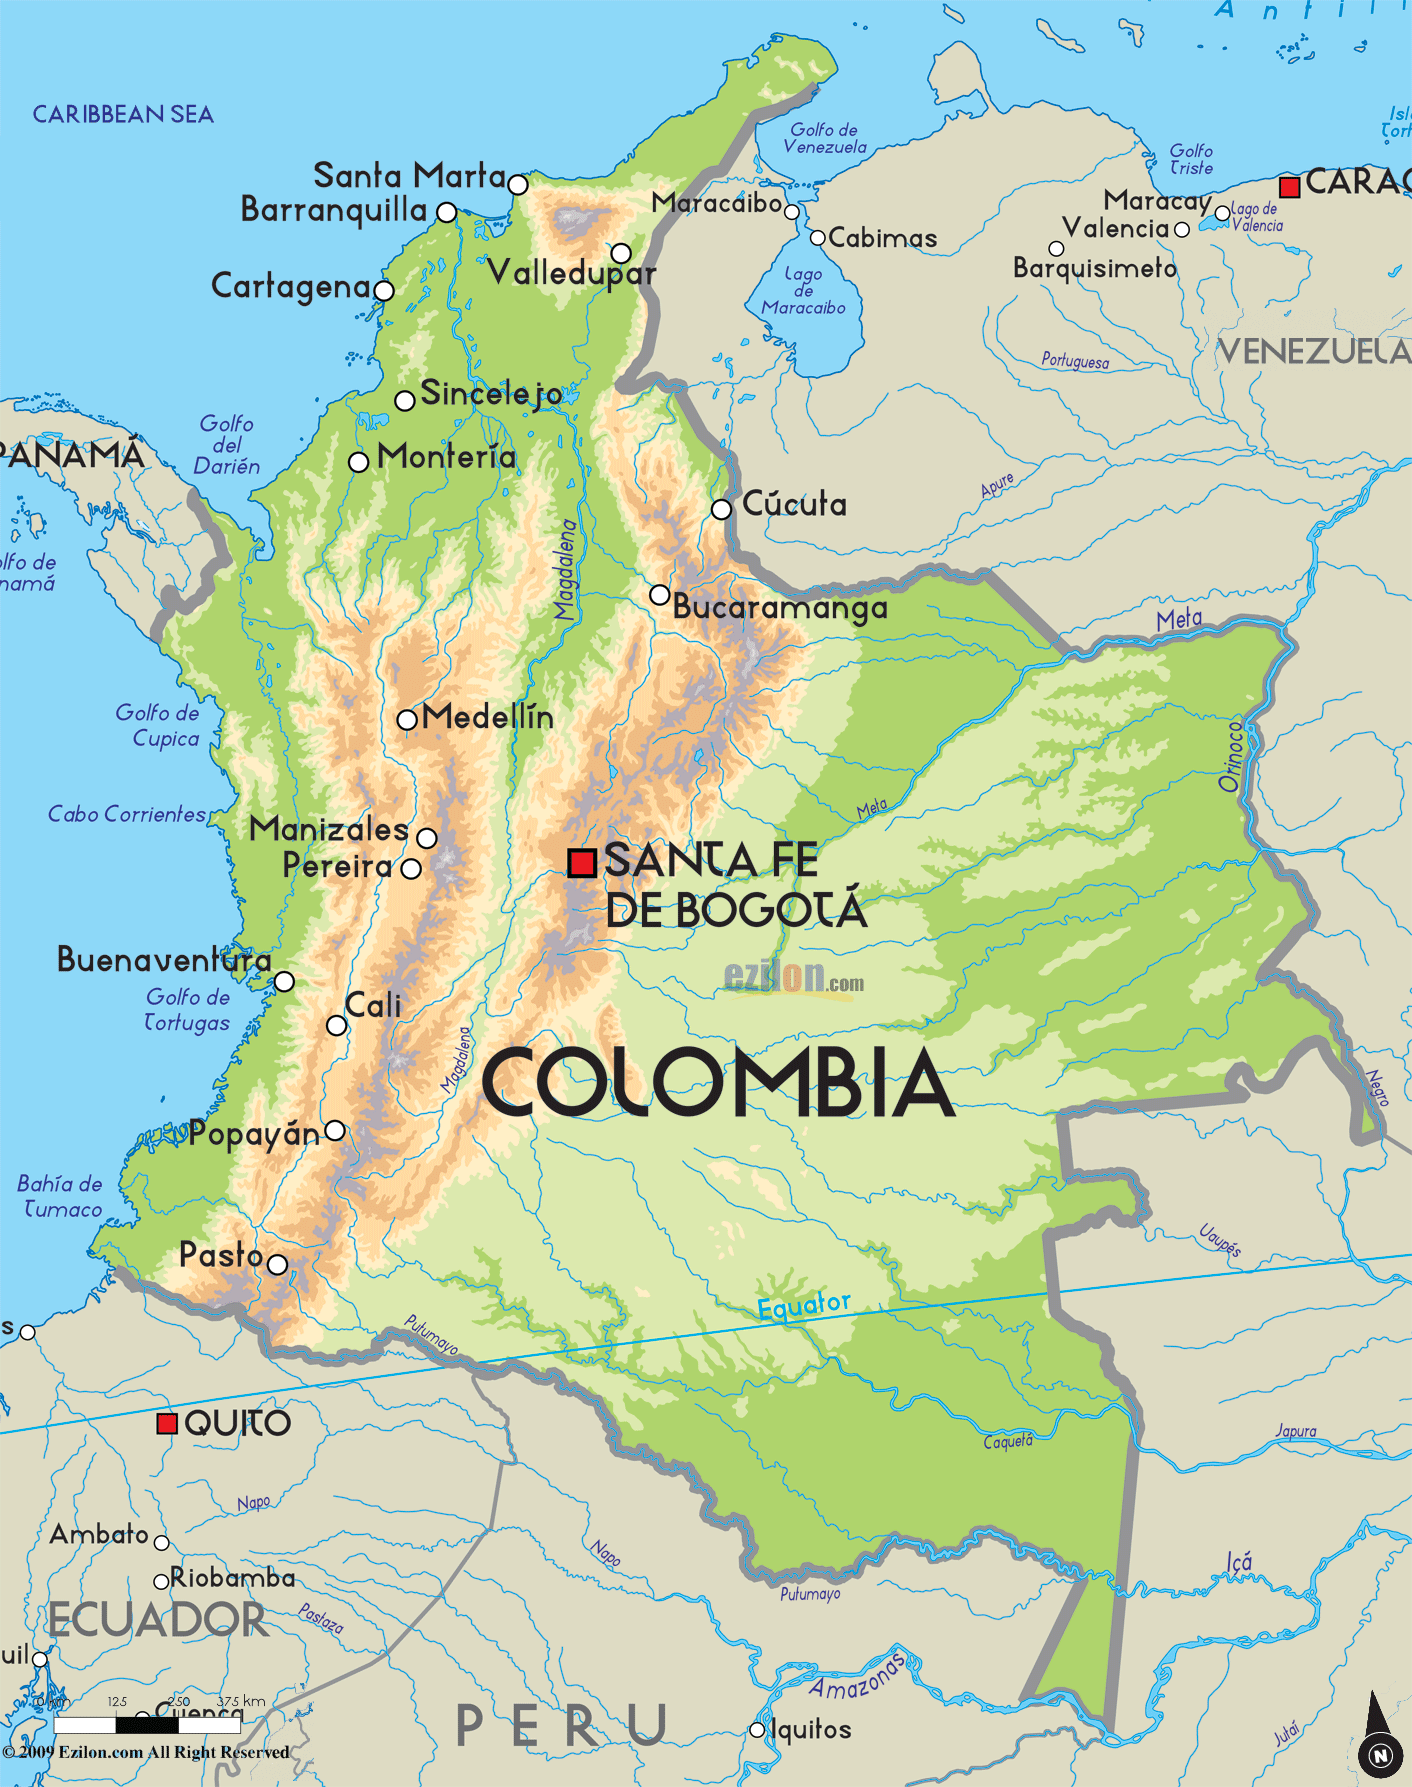 clombia map Colombia Map